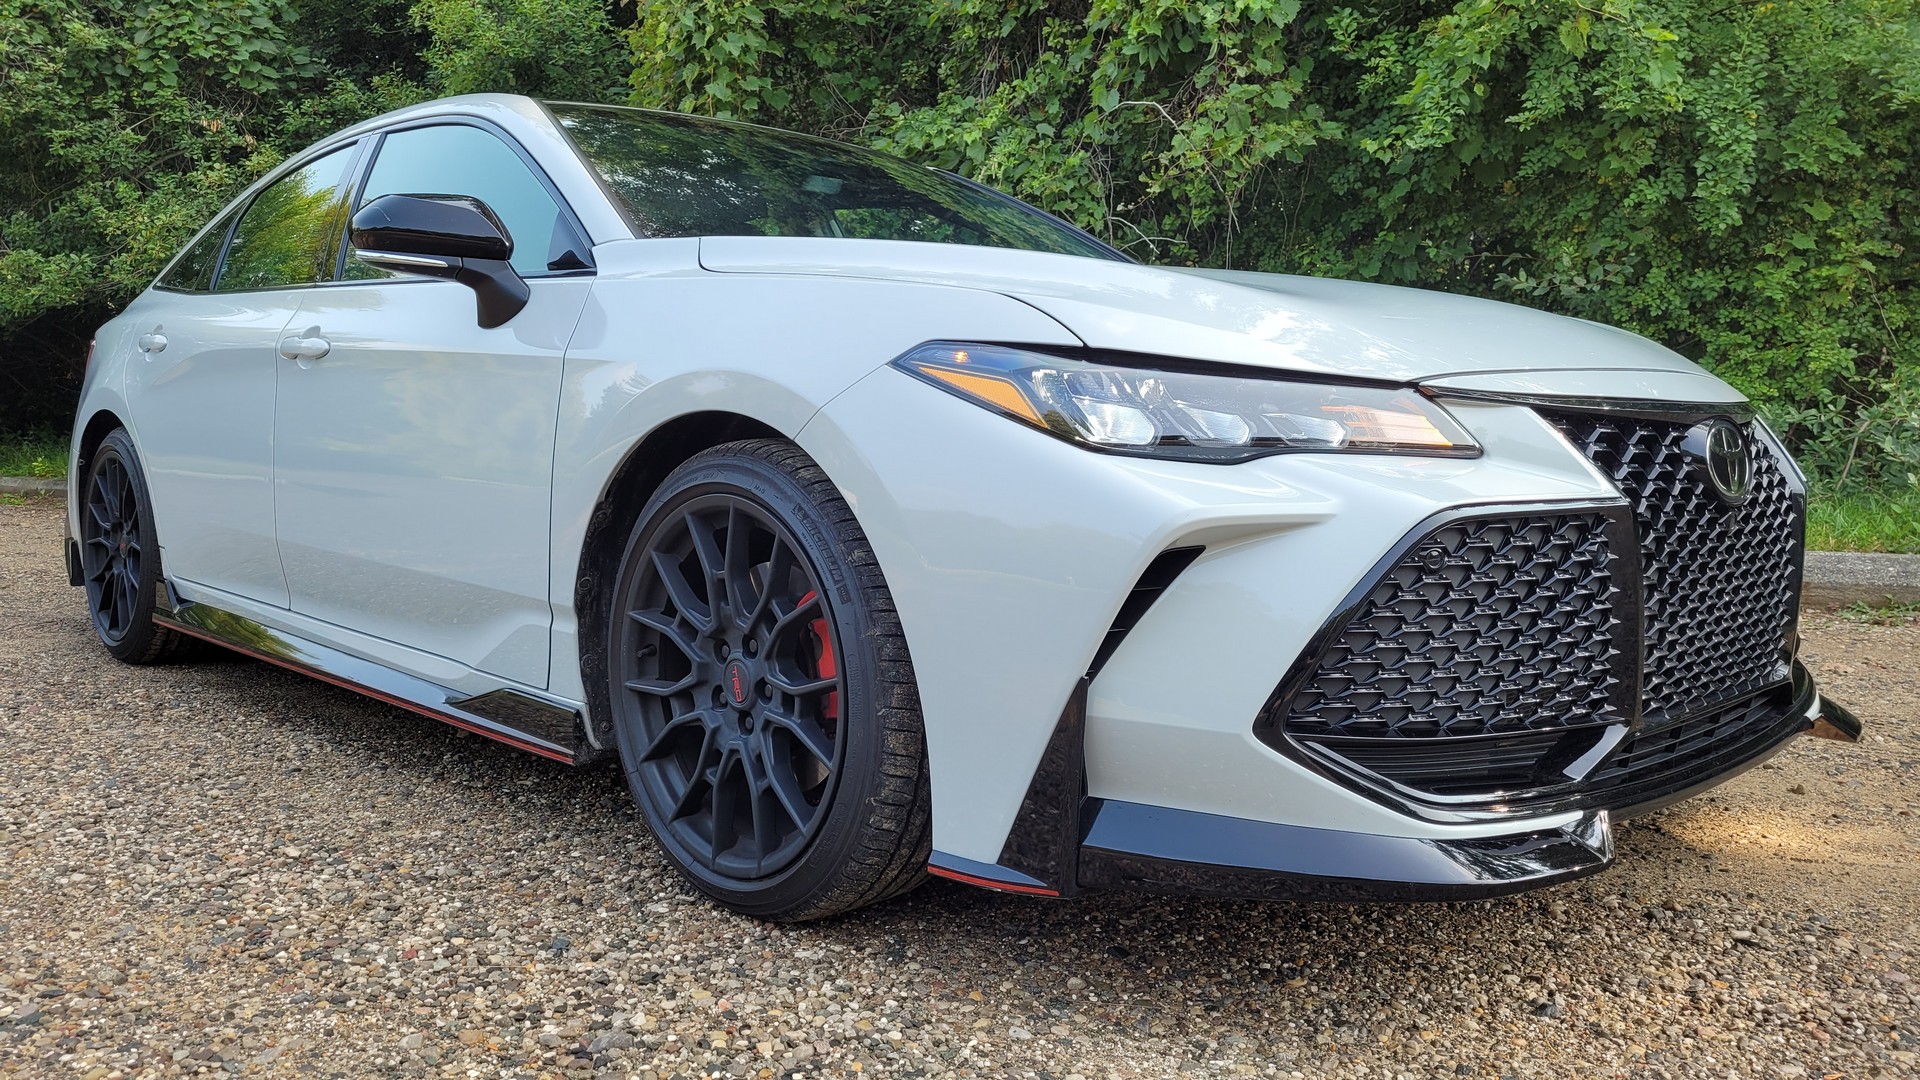 Driven The 2021 Toyota Avalon TRD Has Plenty Of Comfort, But Not